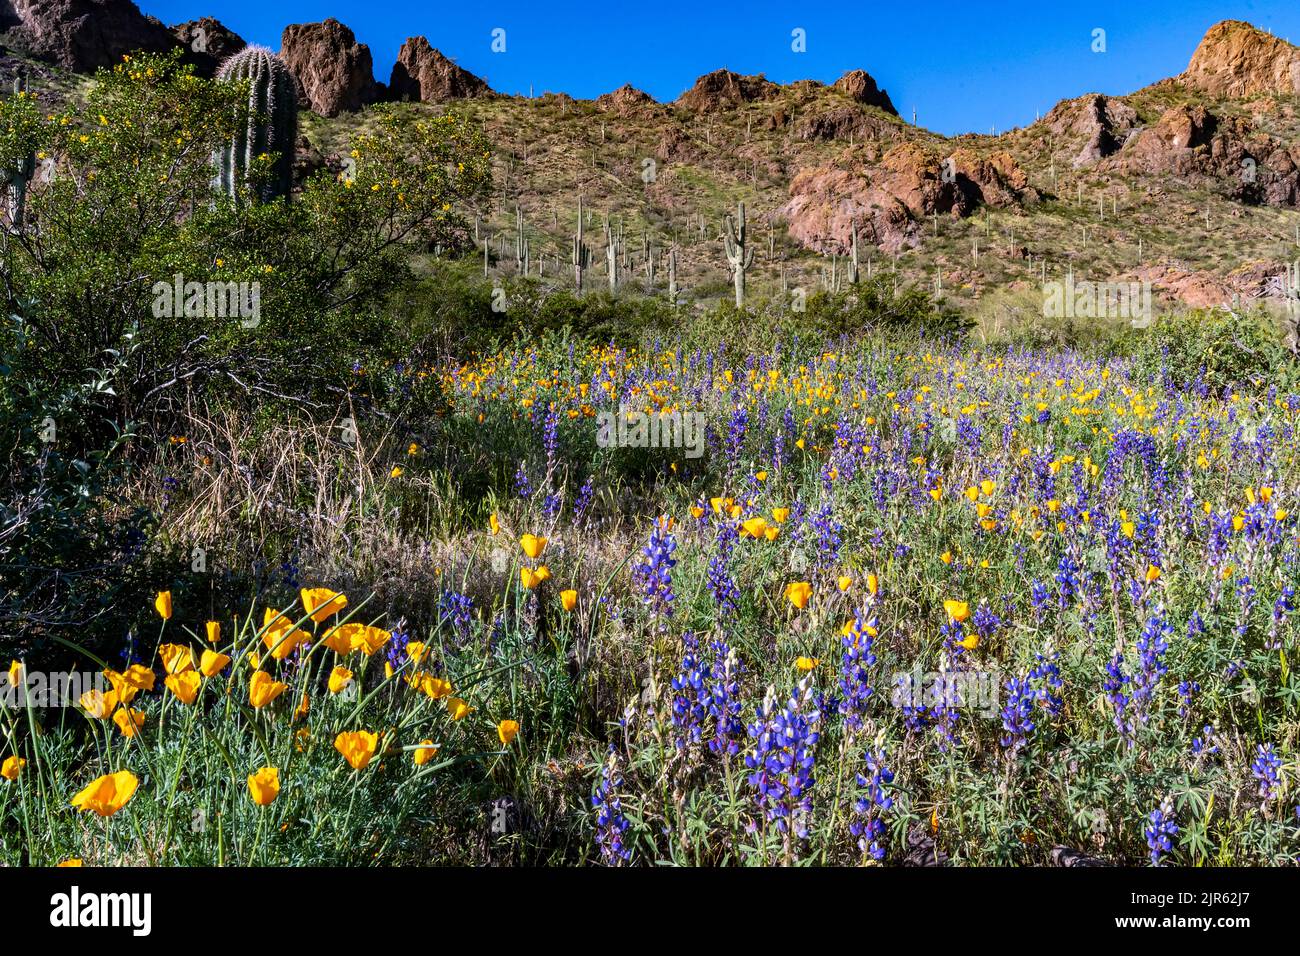 Blooming desert at Picacho Peak State Park (Arizona, USA) in March 2020. Stock Photo